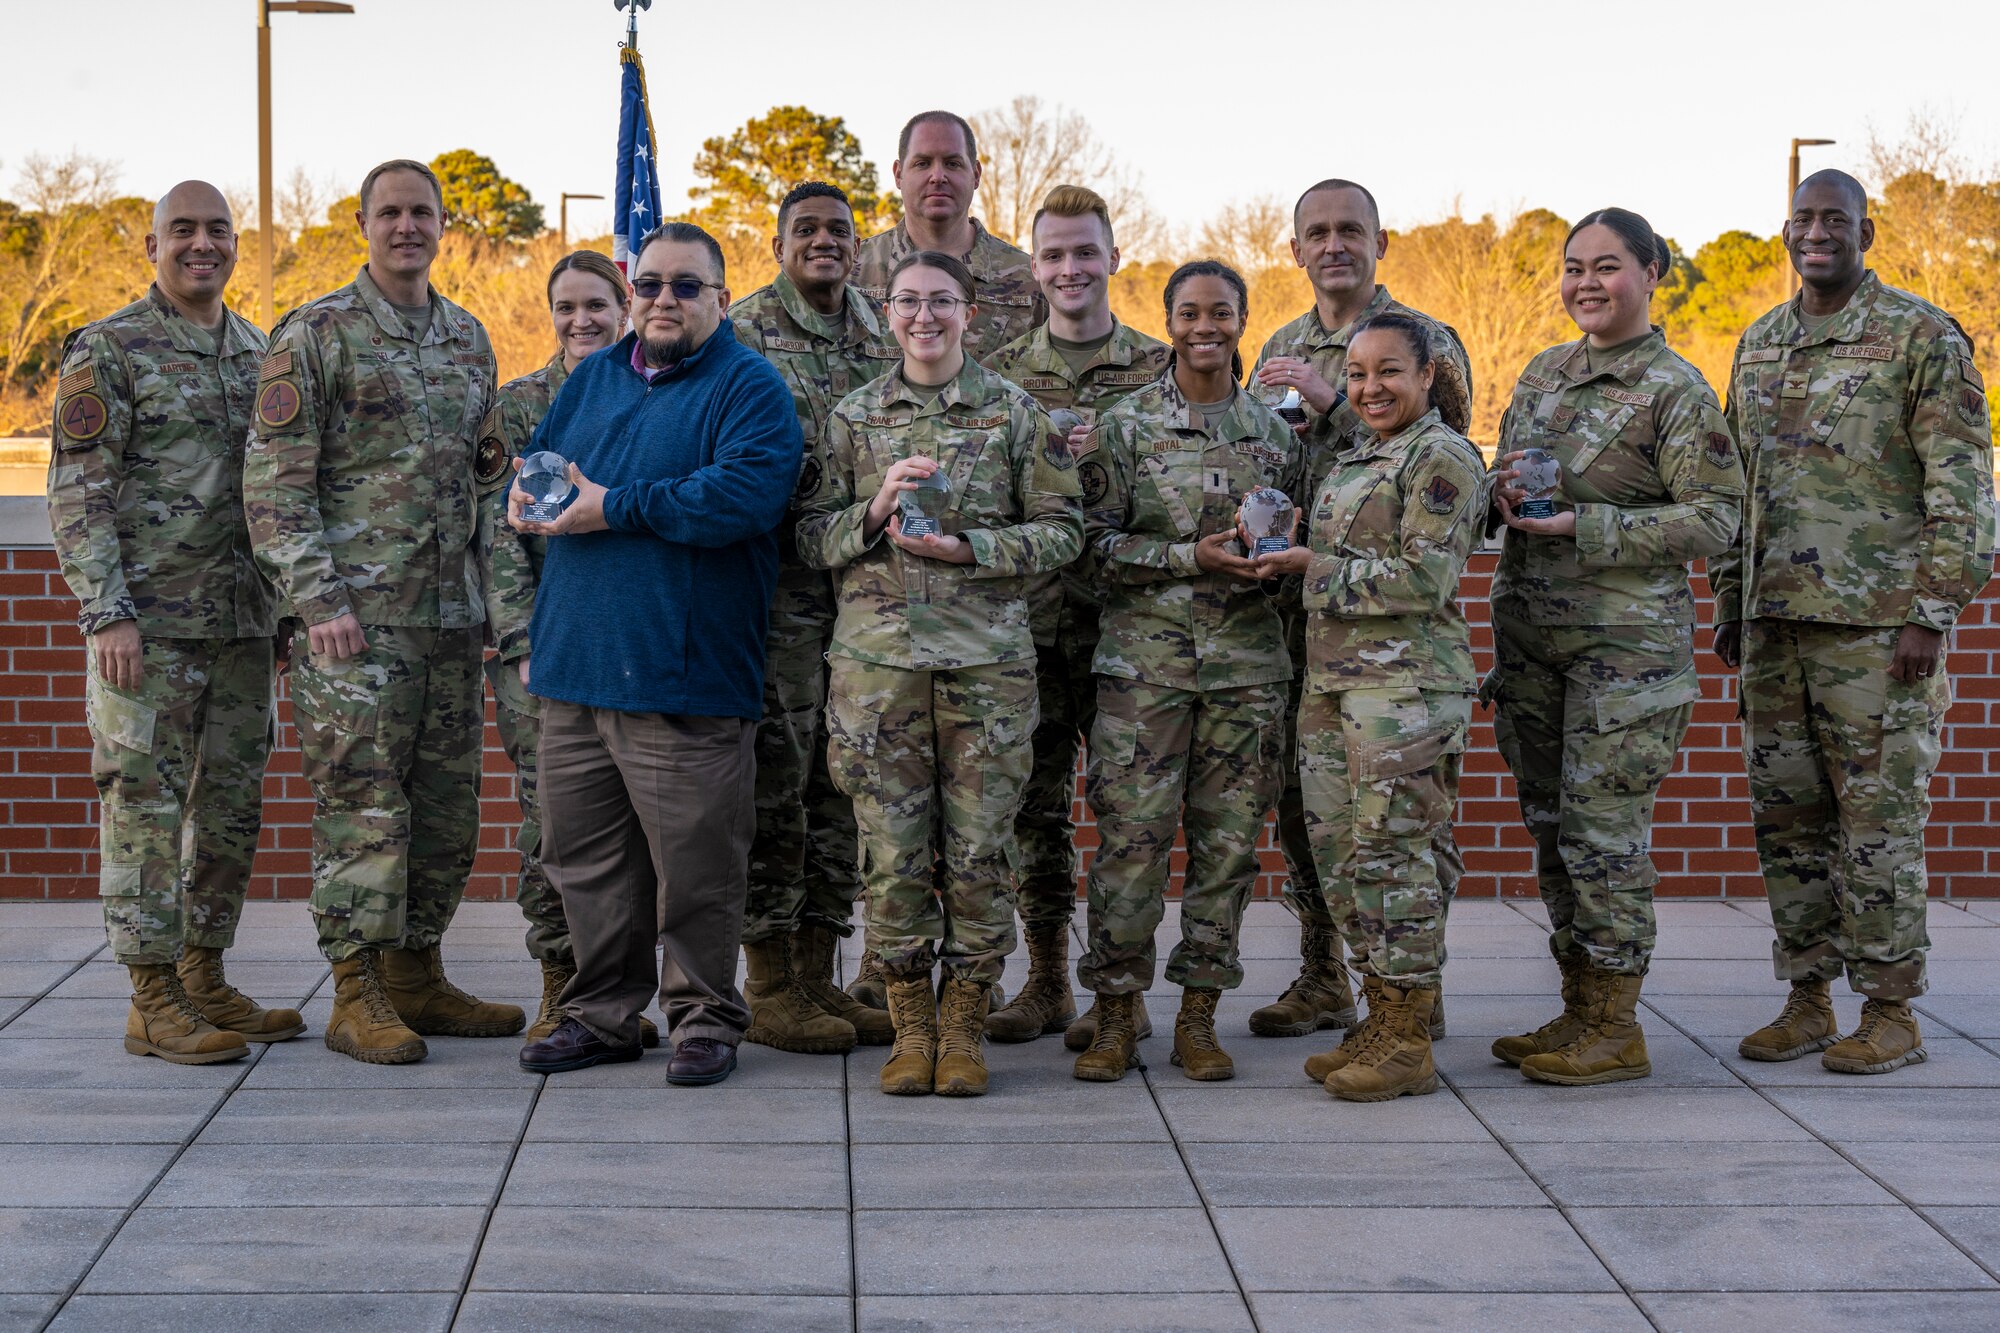 The ACC Air Force Medical Service Awards were awarded to 13 members and teams from the 4th MDG.